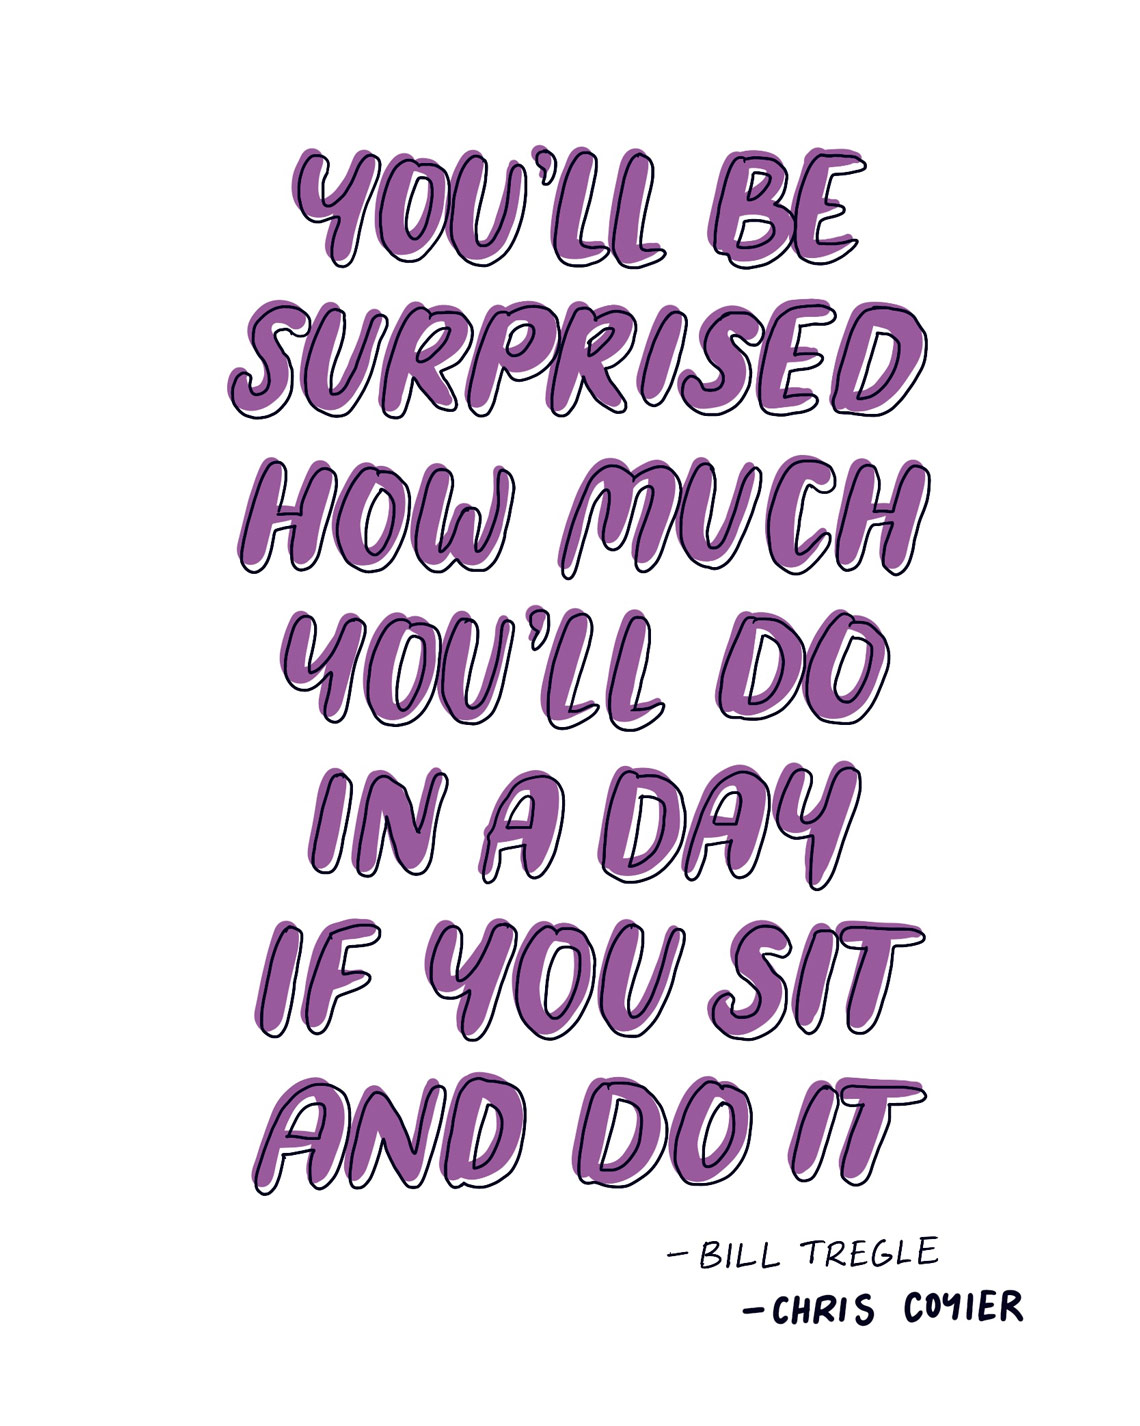 You'll be surprised how much you'll do in a day if you sit and do it - Bill Tregle via Chris Coyier